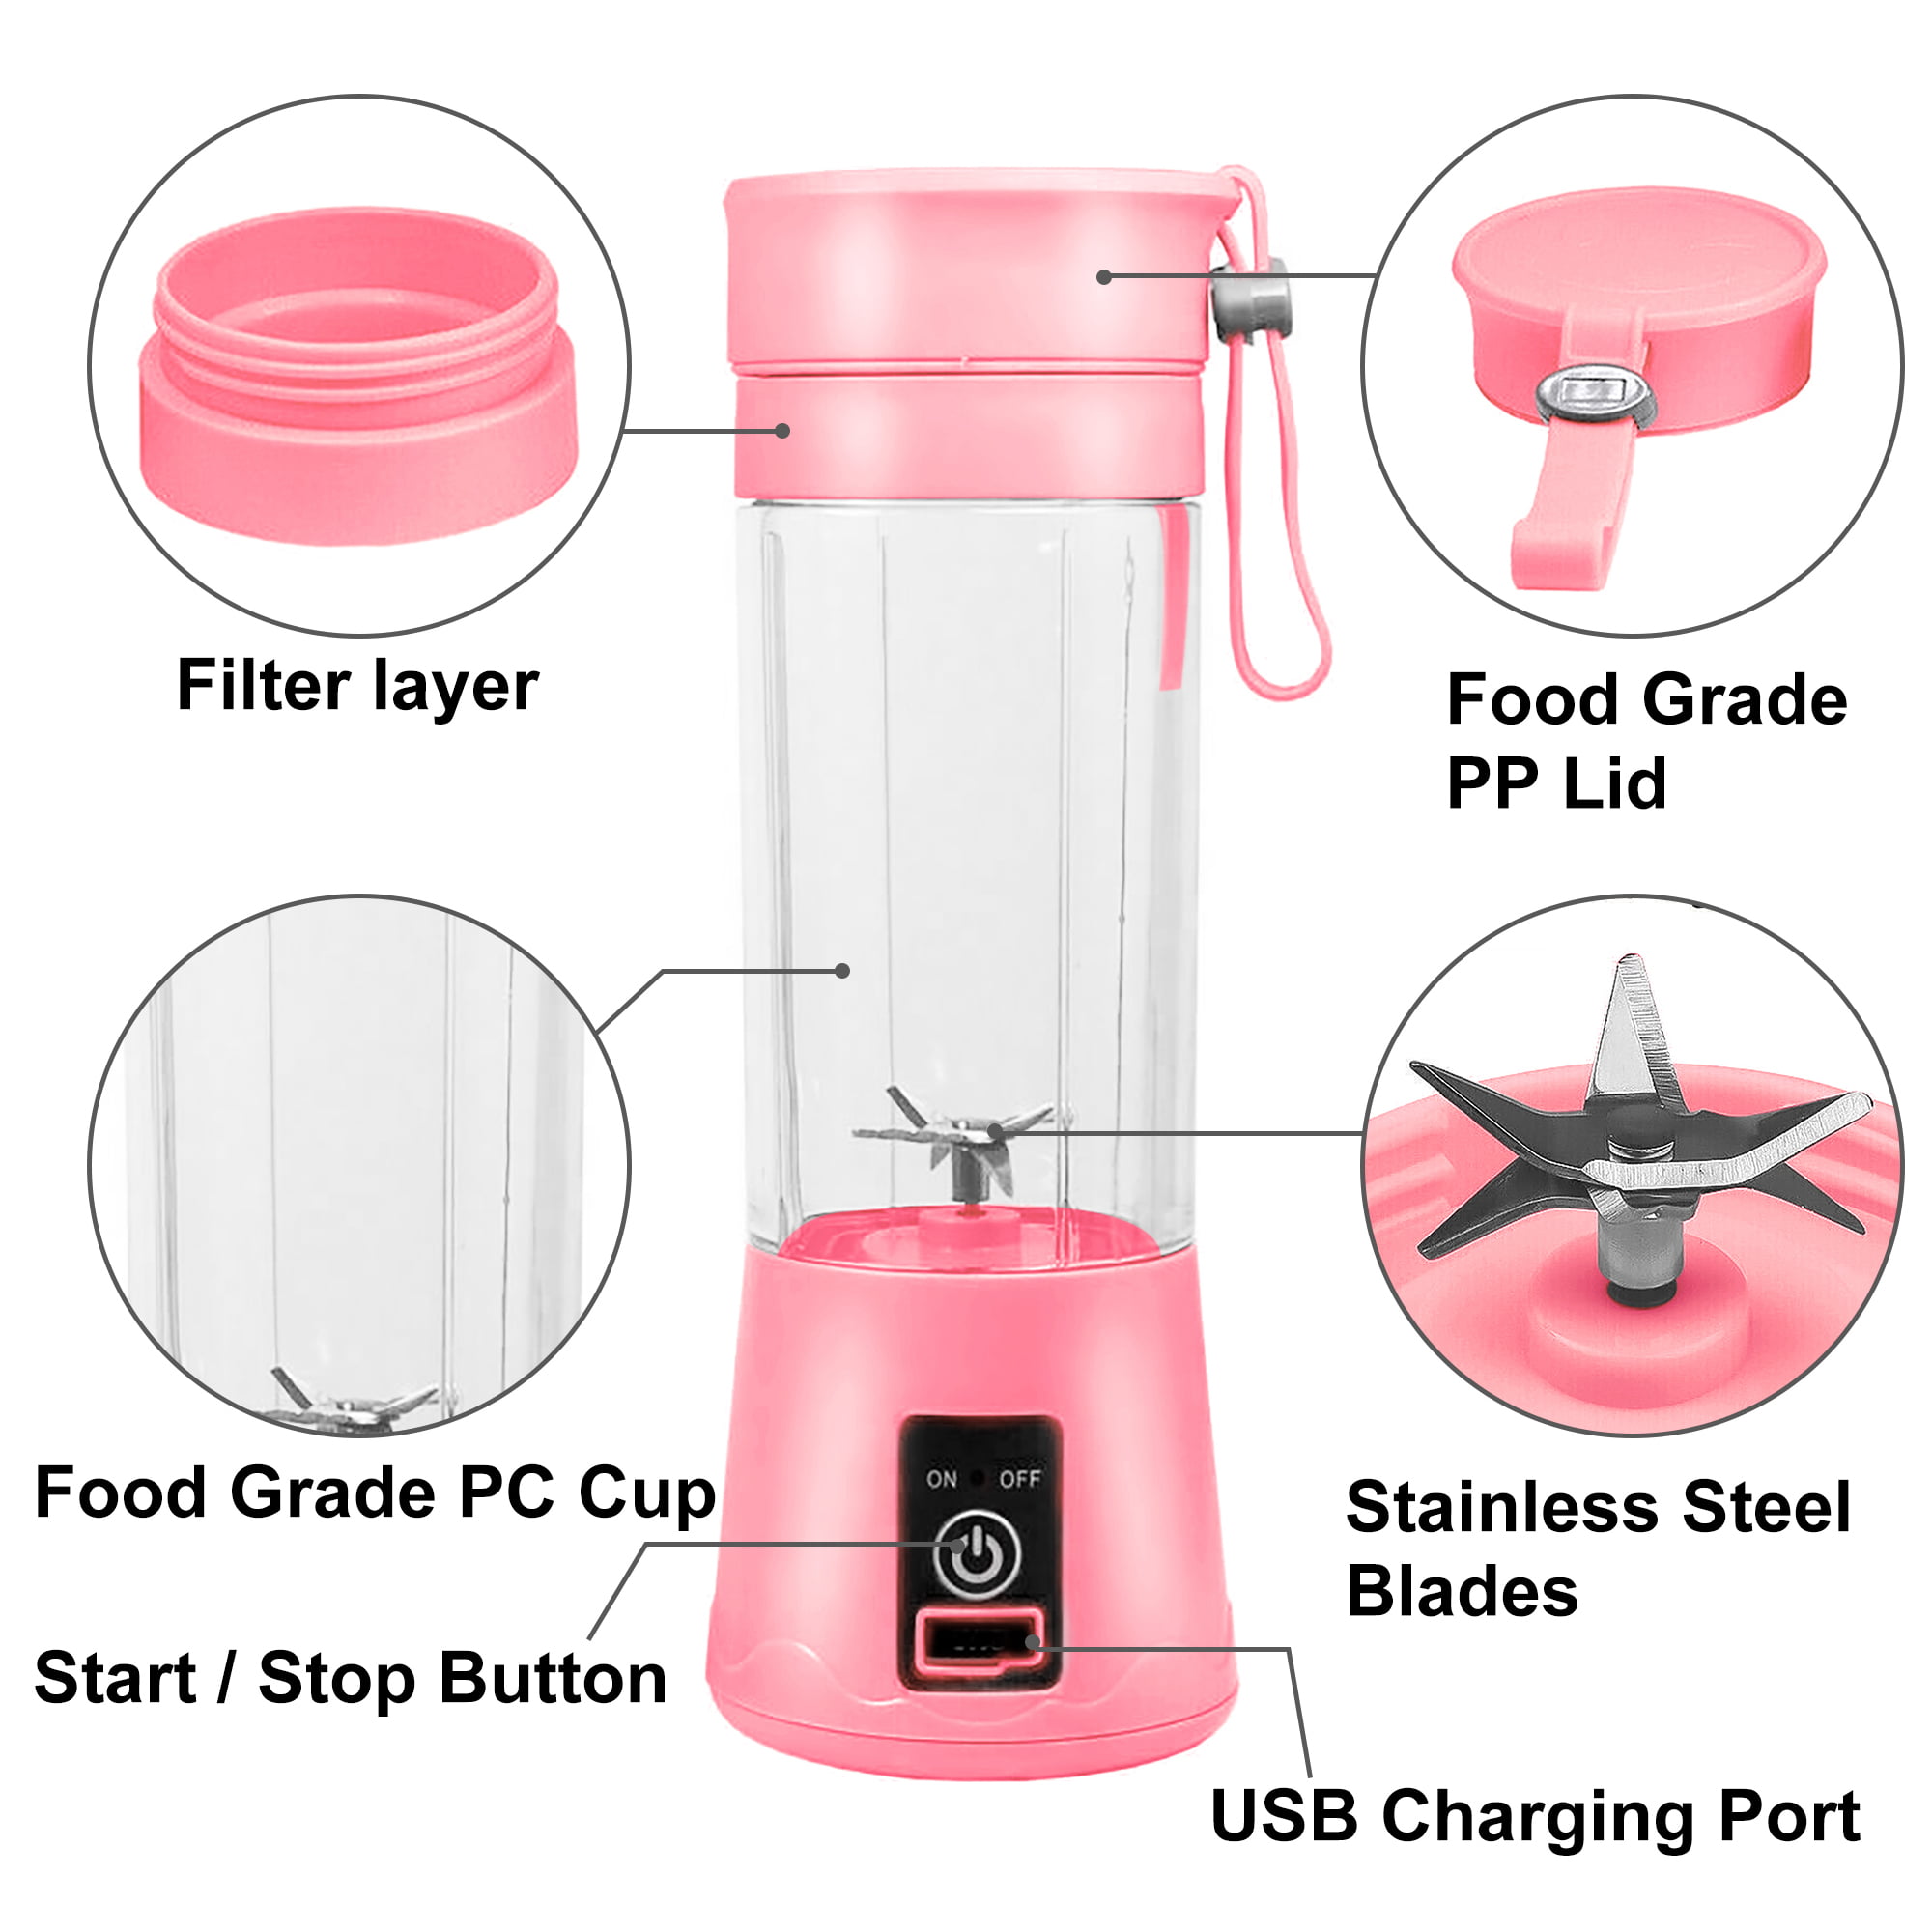 Portable Blender, Mini USB Blender for Shakes and Smoothies 13.5 oz Juicer Cup Type-C Personal Blender with Ultra Sharp Six Blades,BPA Free Blender